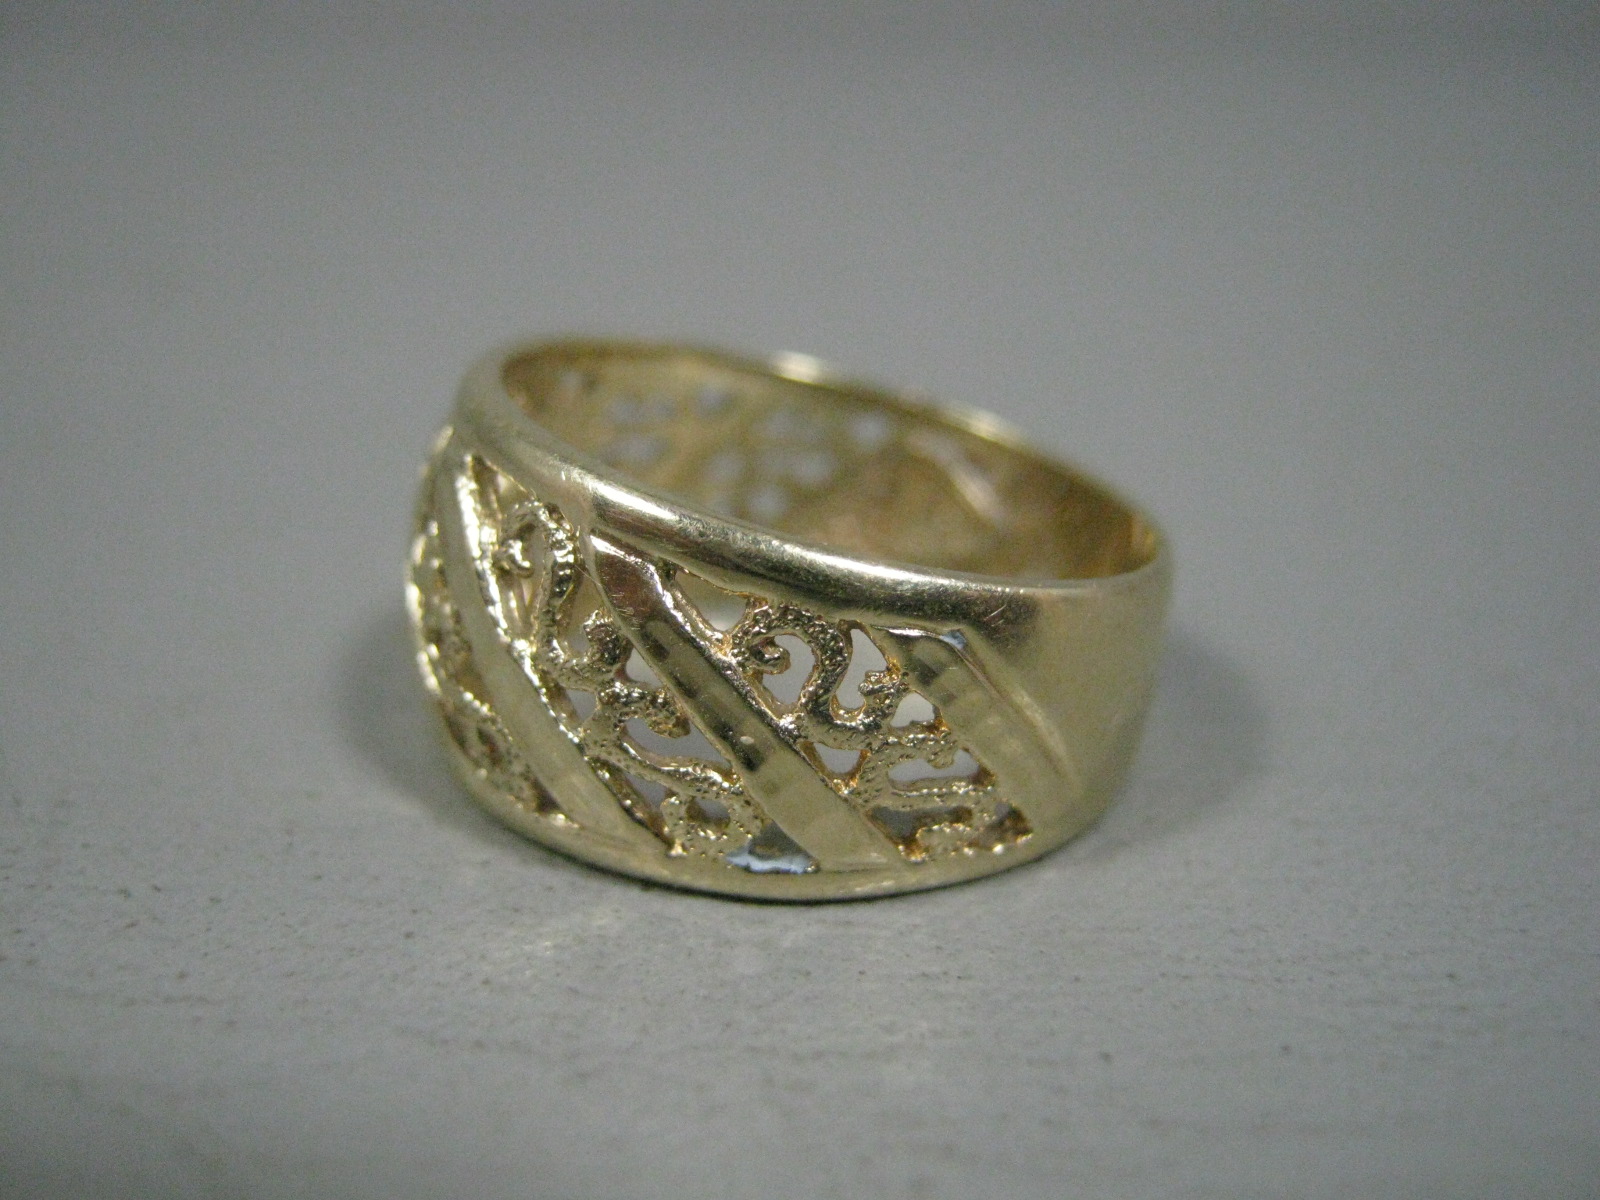 Lovely 14k Yellow Gold Ladies Womens Beverly Hills Filigree Scroll Ring Size 7 1